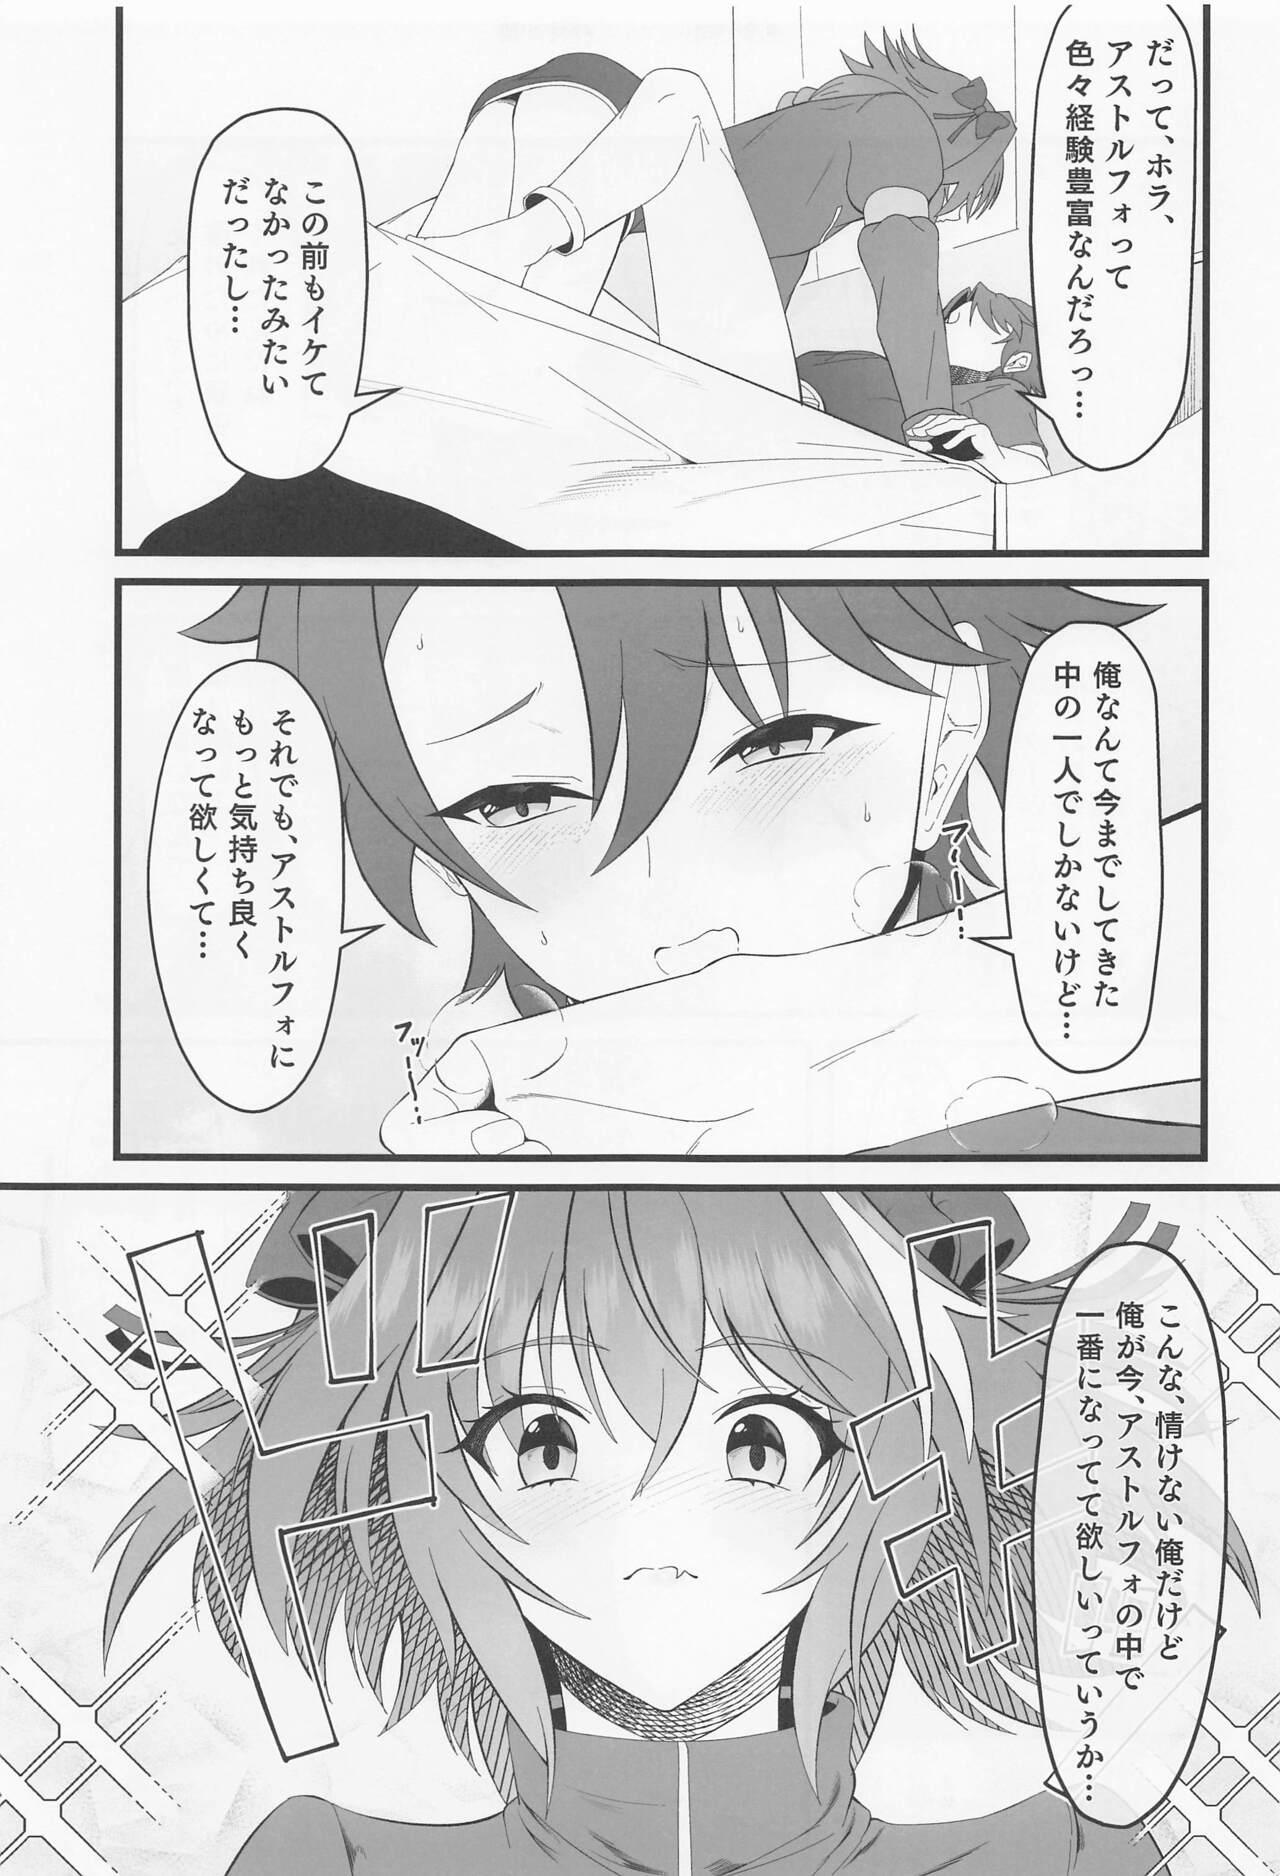 Arabe Kimi no Ichiban ni Naritakute - I wanted to be your number one. - Fate grand order Pigtails - Page 8